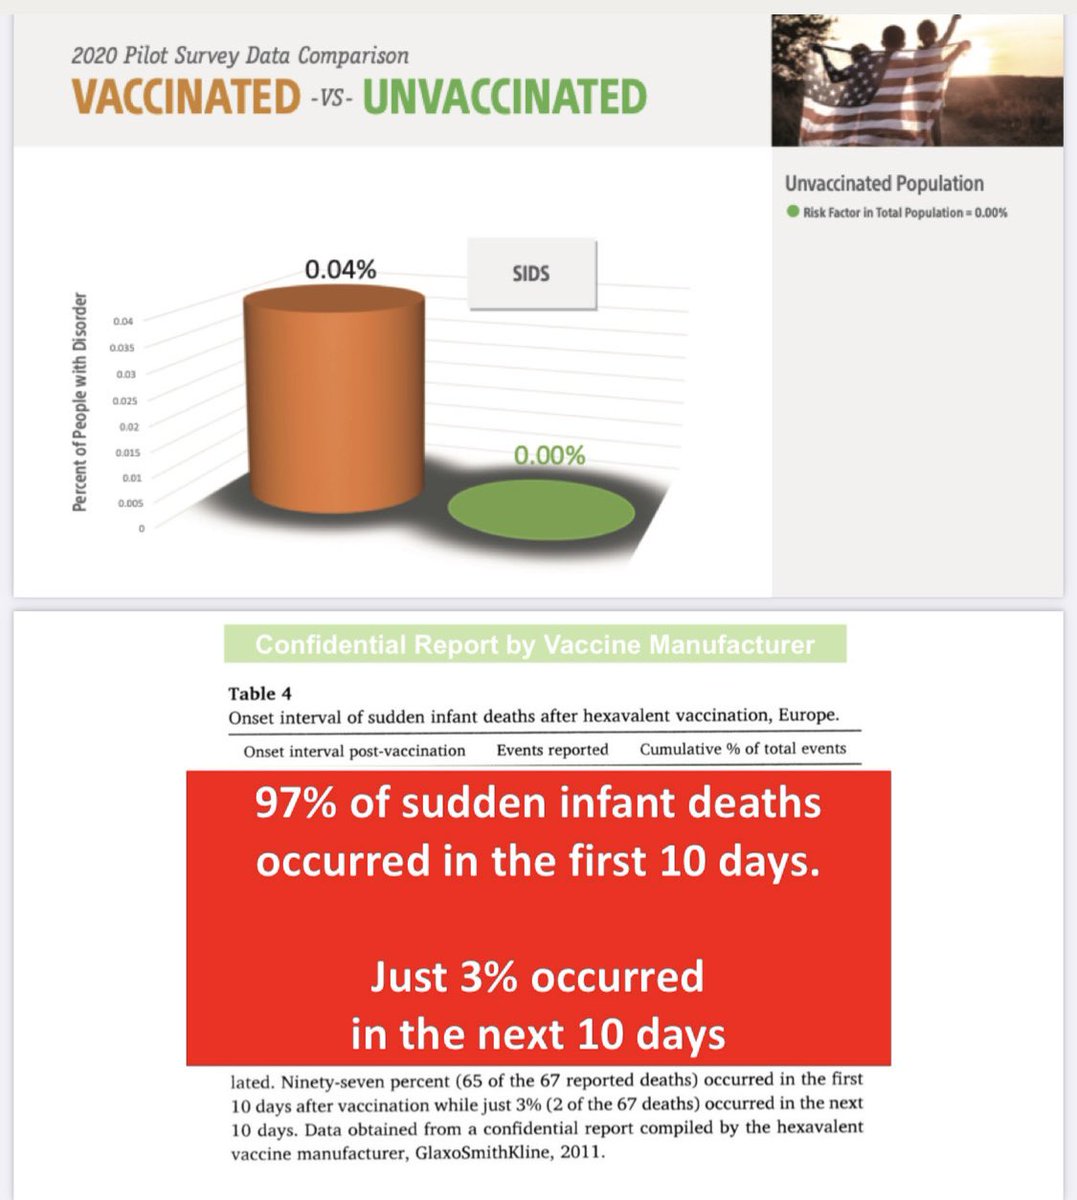 Just this one slide alone should be mandatory viewing for every prenatal patient. The time to learn about childhood vaccines is before you come into the hospital.